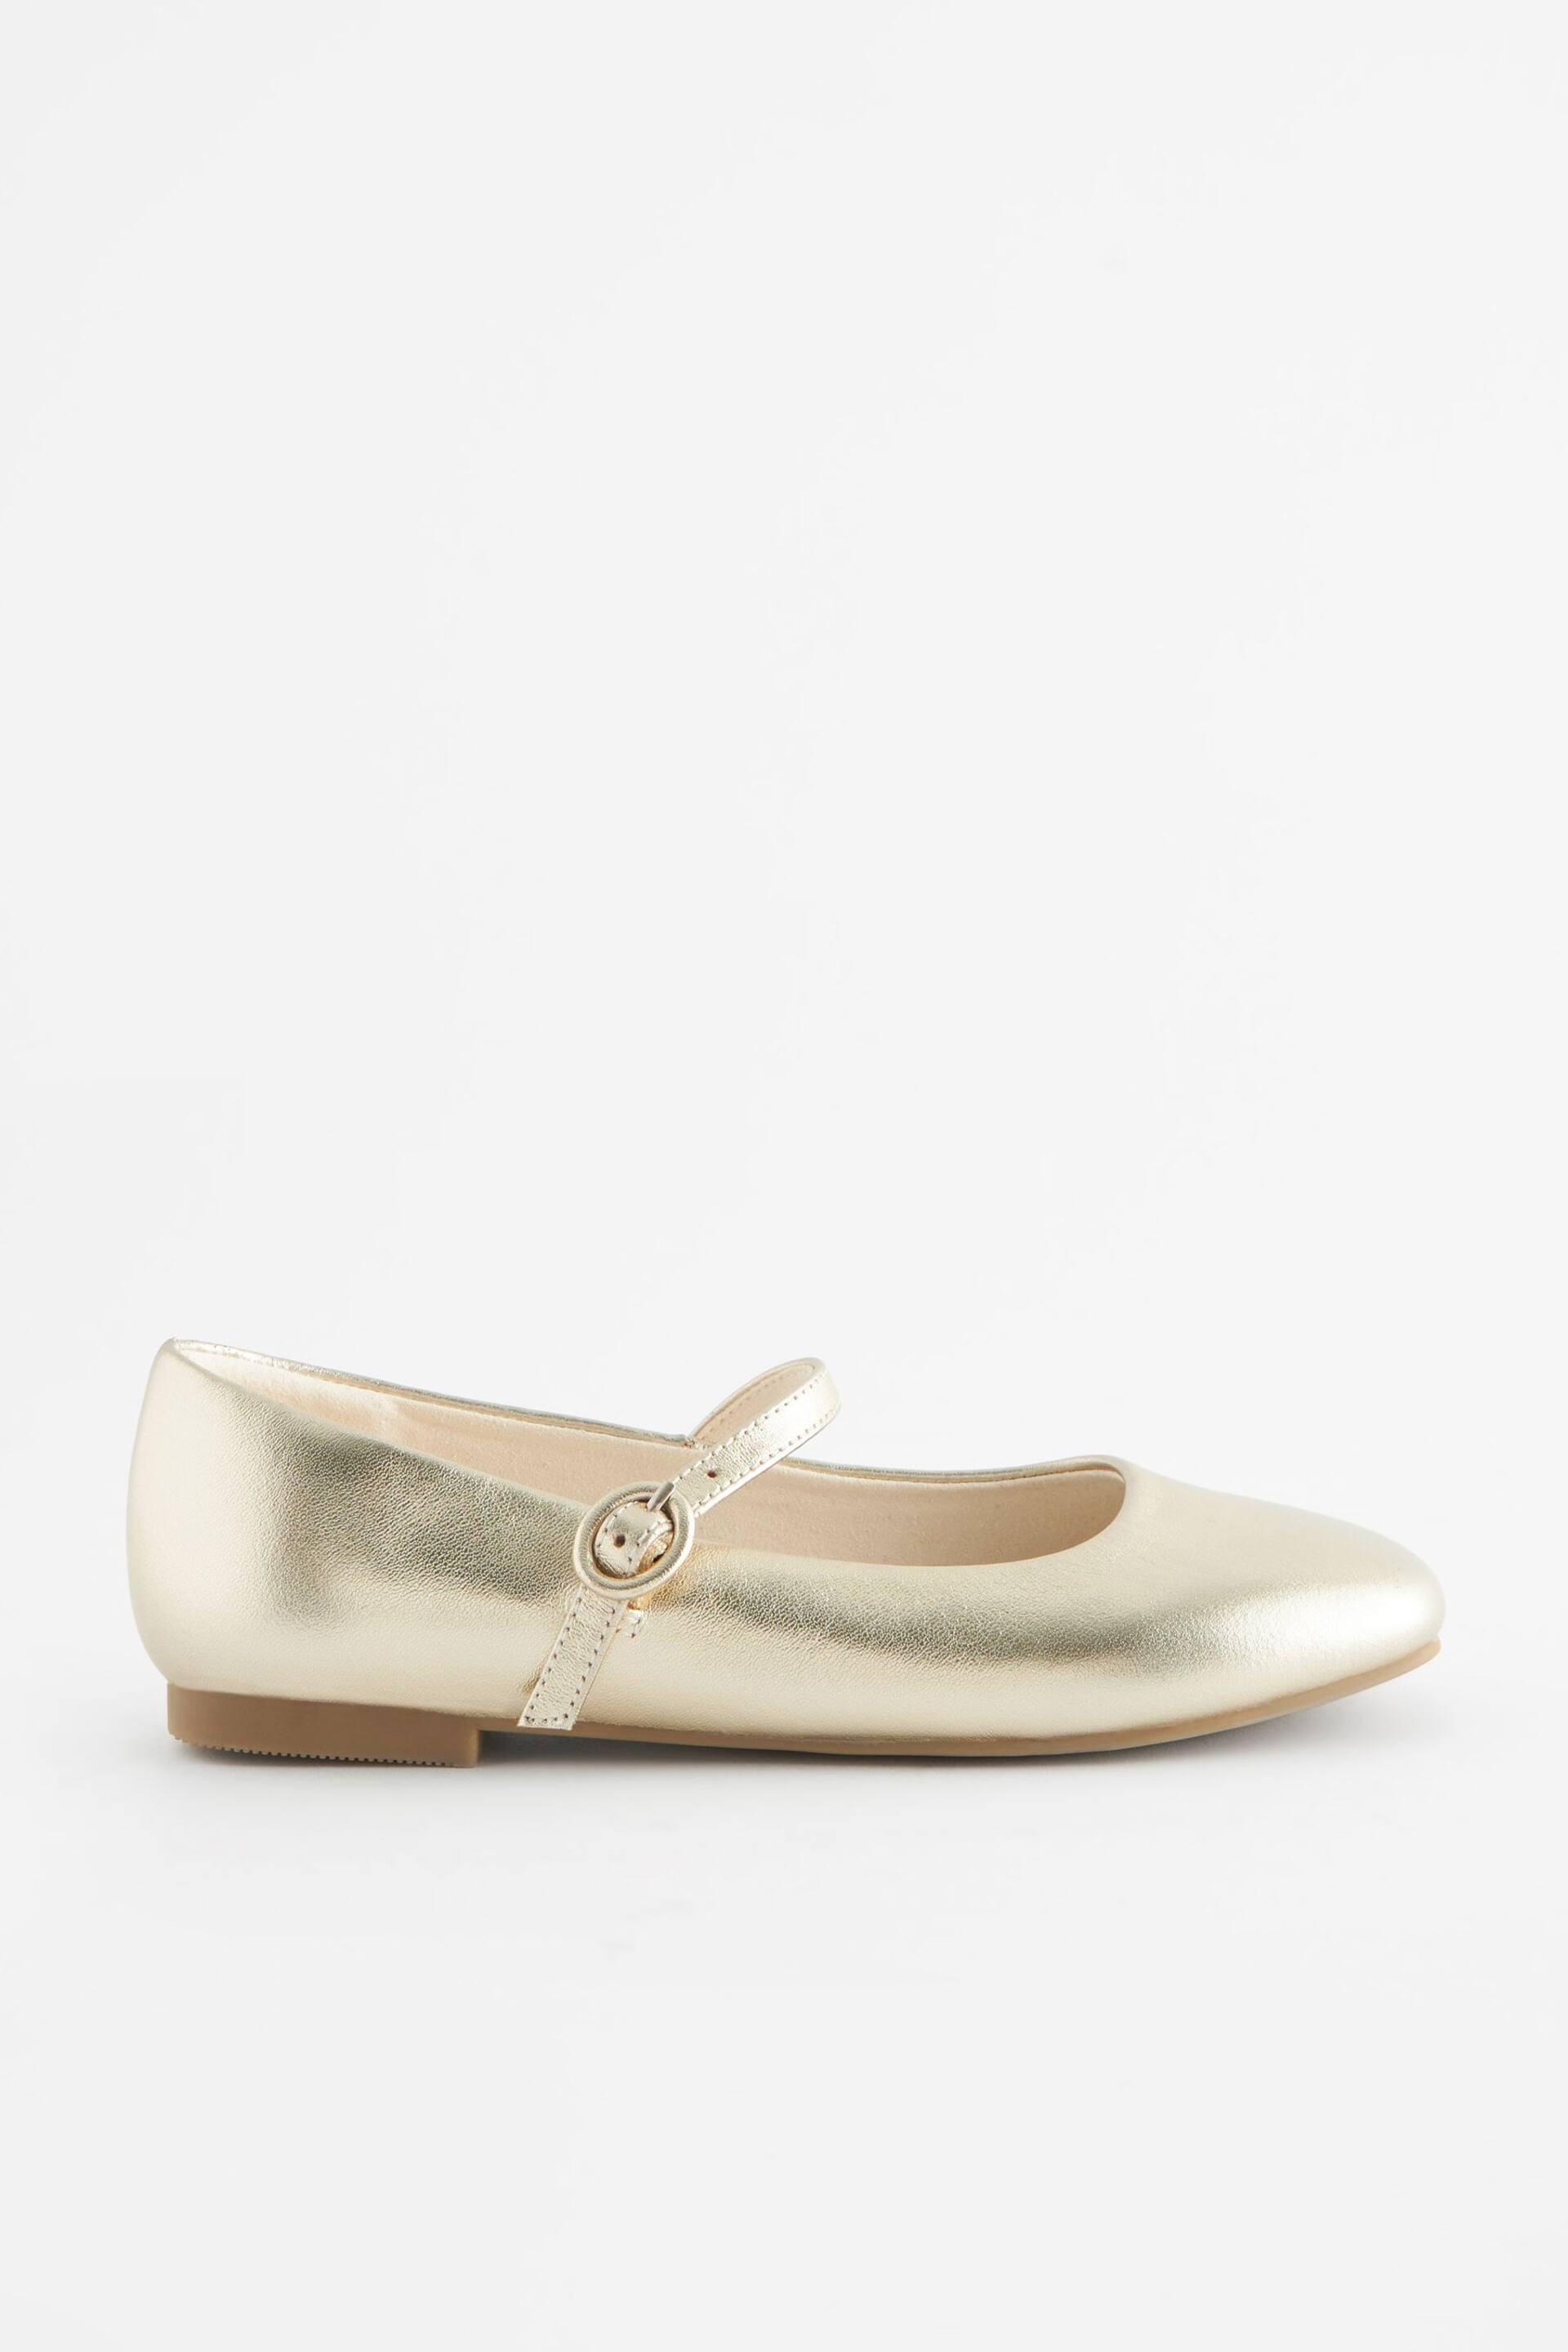 Gold Metallic Leather Mary Jane Occasion Shoes - Image 3 of 6